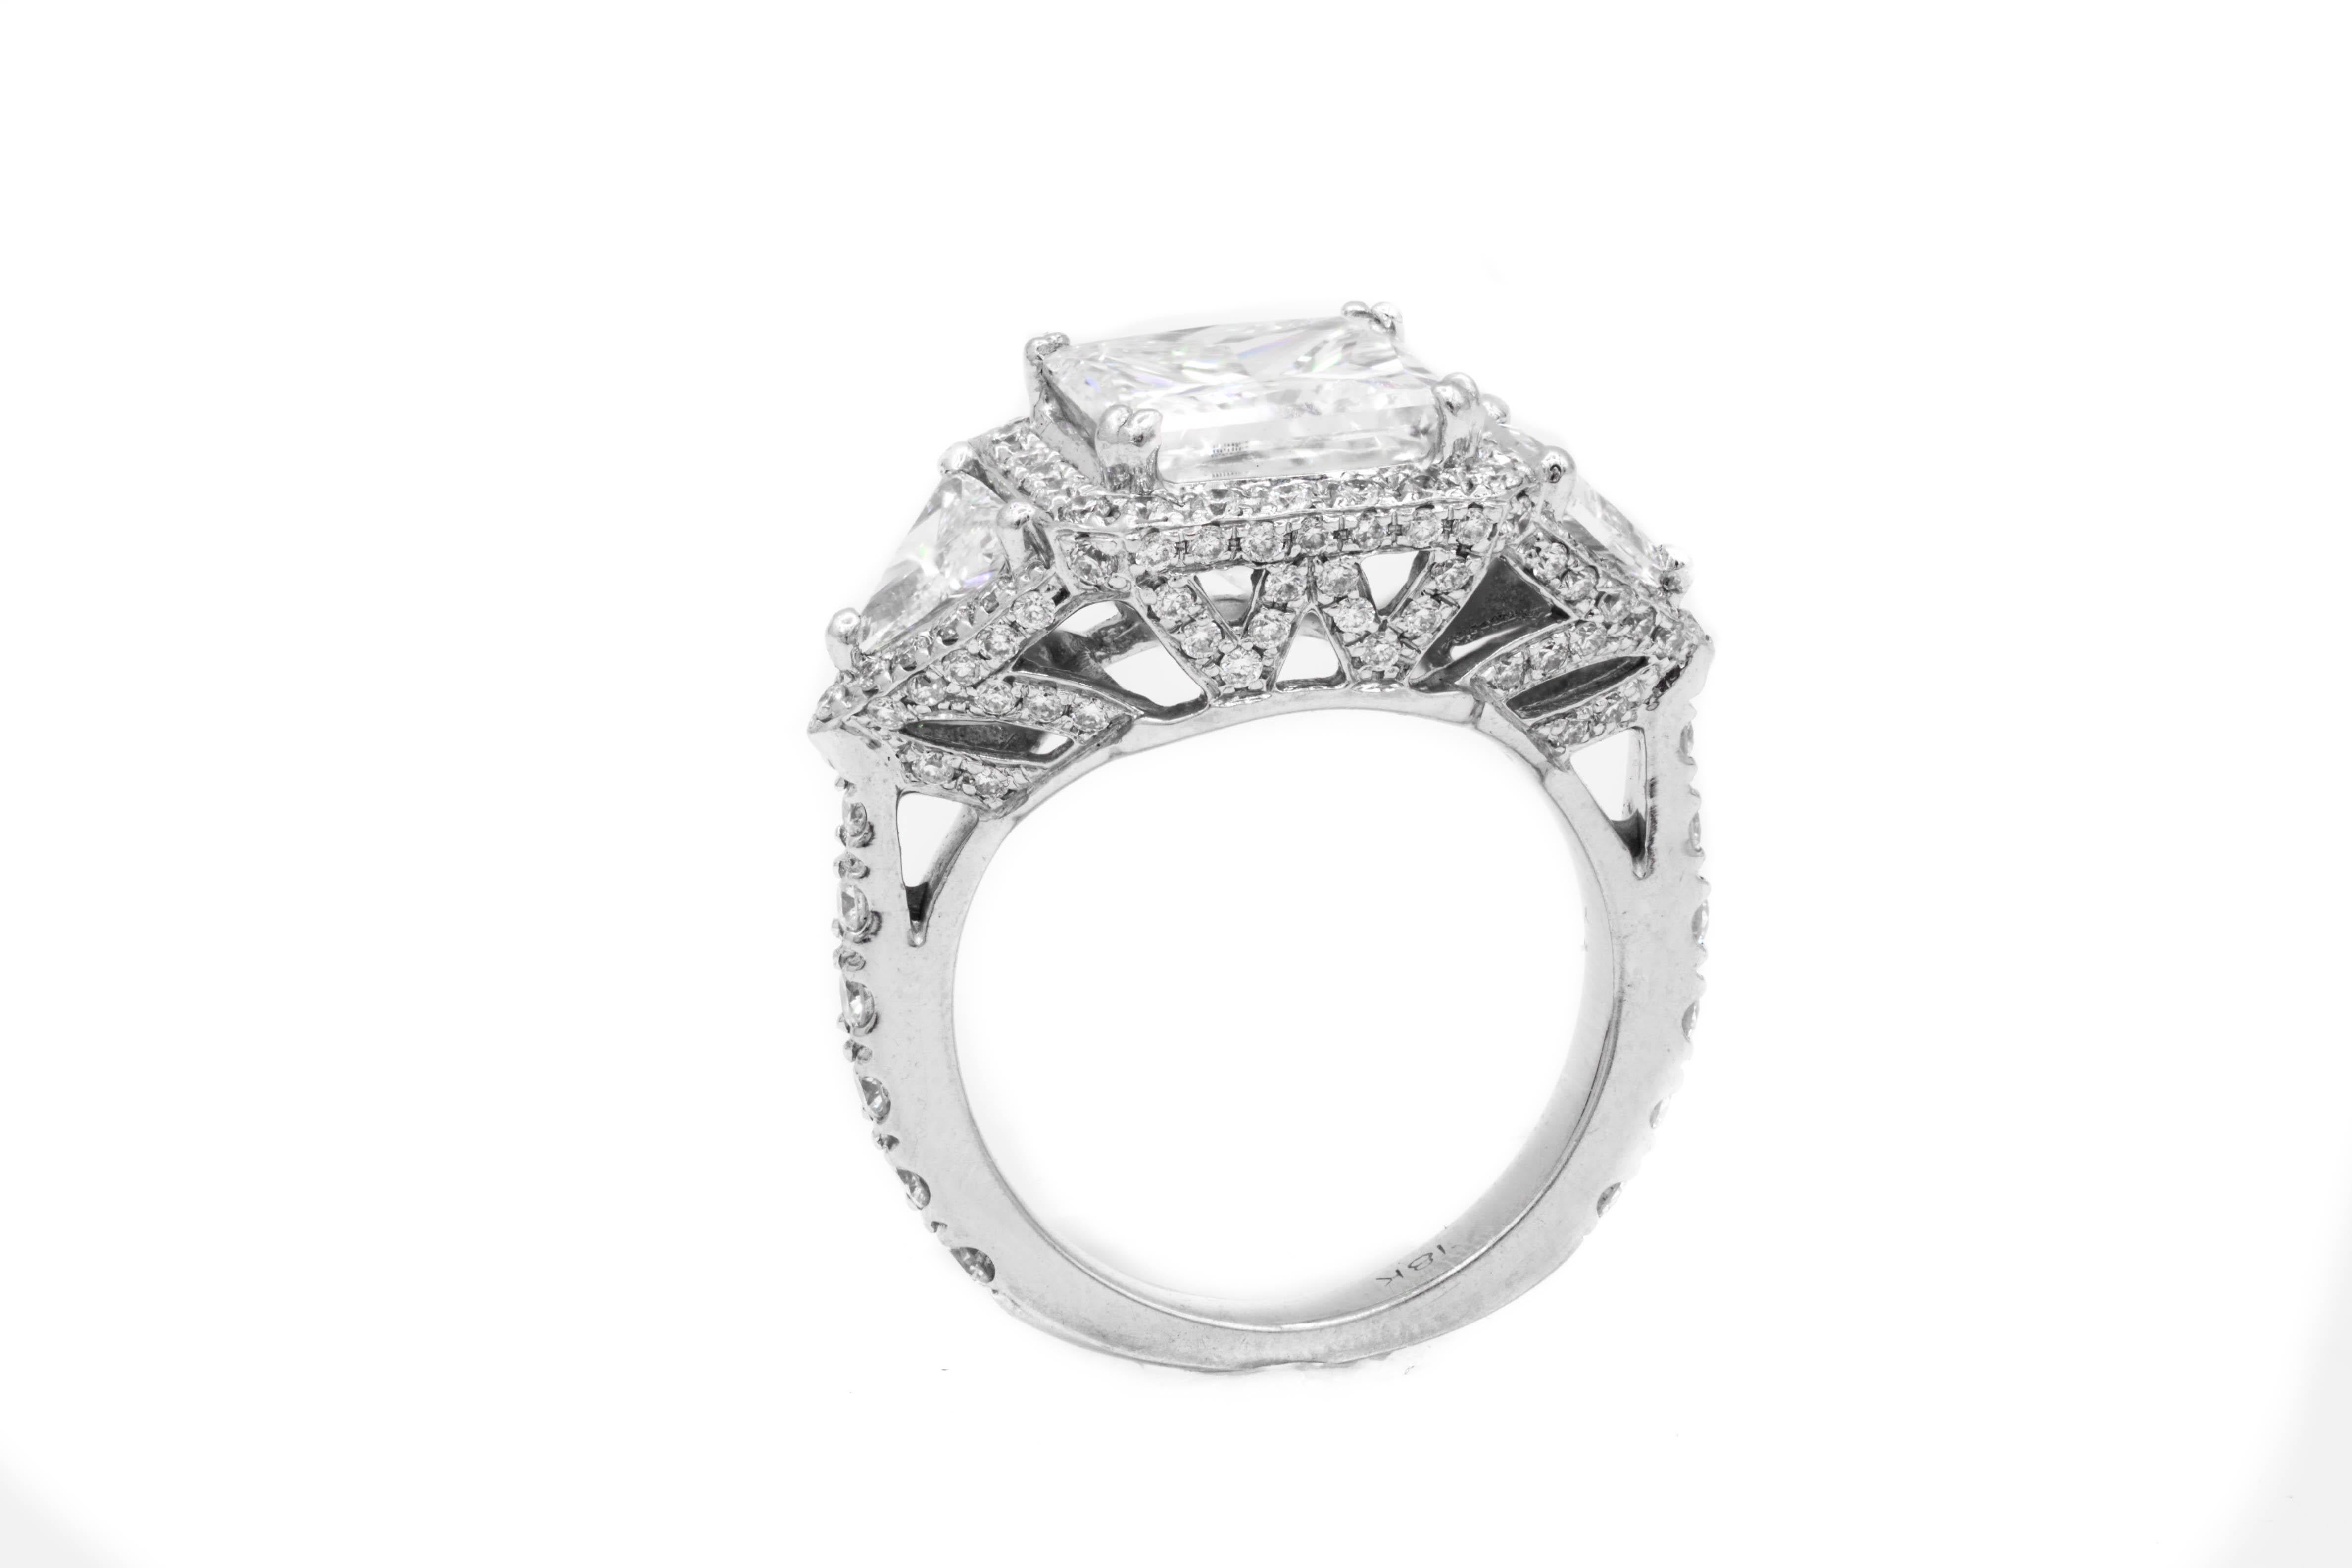 18k white gold engagemend ring feauteres 4.01 ct j color vs2 clarity diamond with 2.25 ct of diamond on the side 
